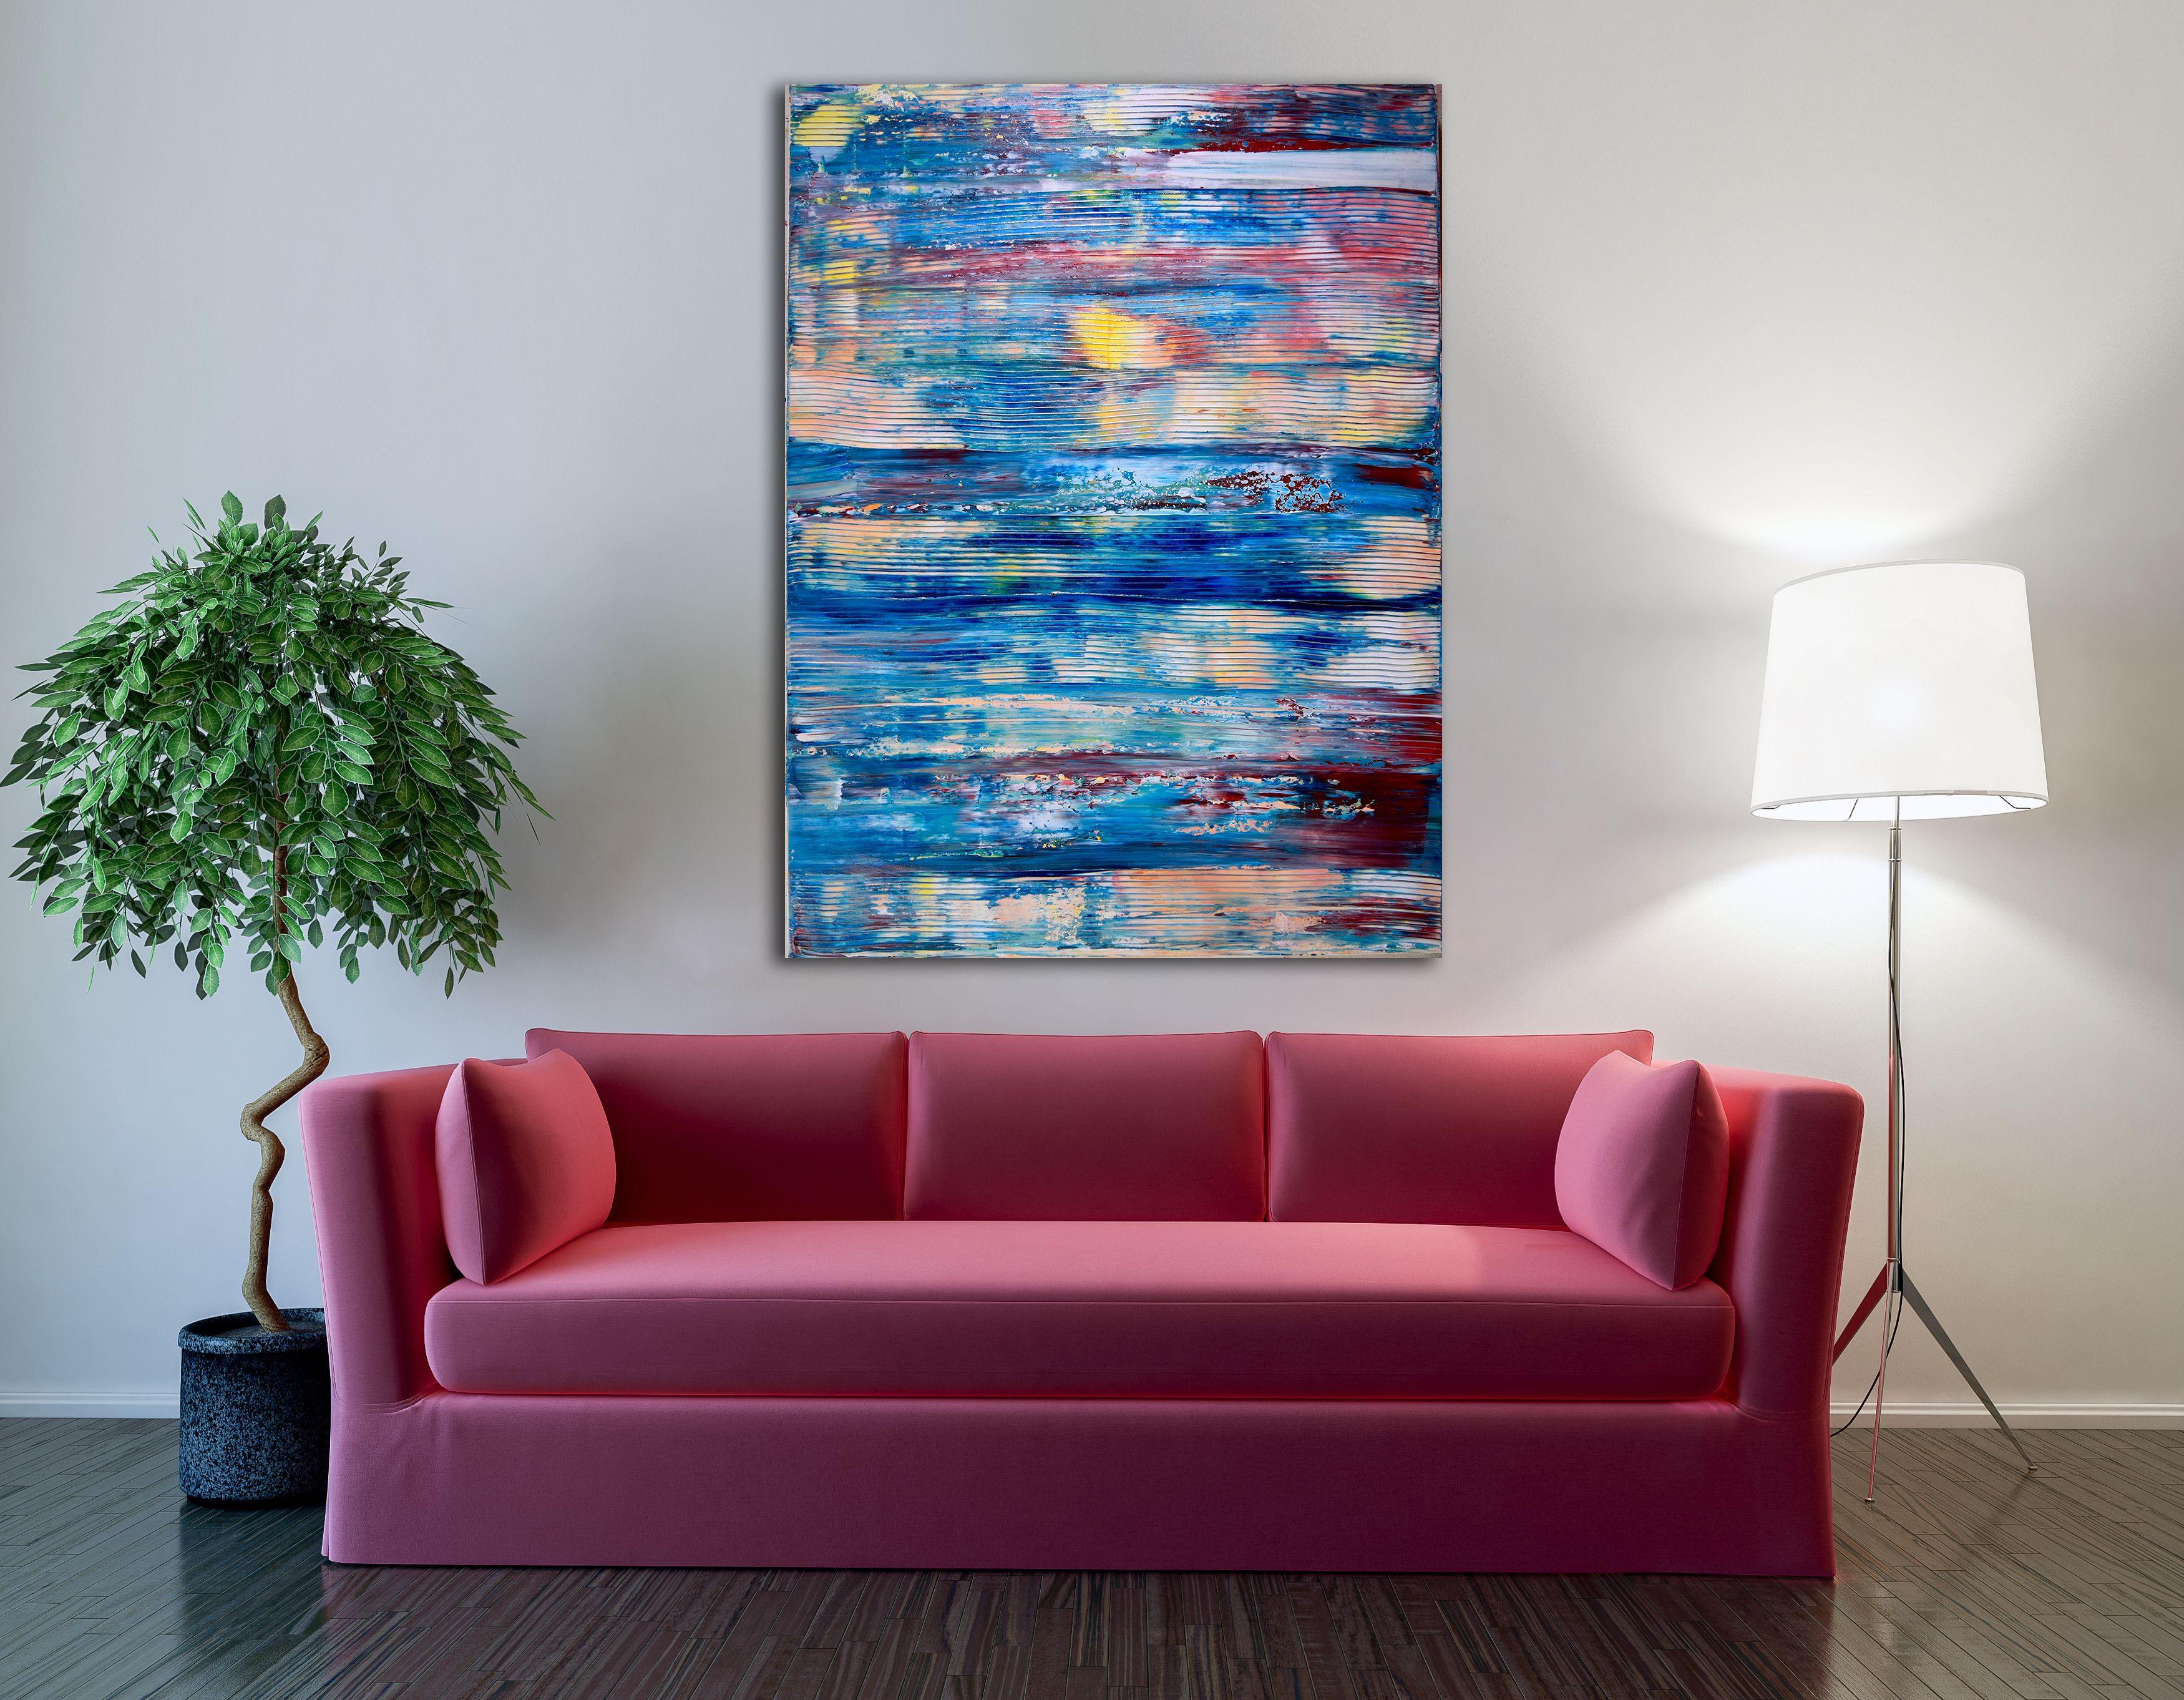 Thick layered colorfield style piece with vibrant shades of blue, yellow undertones and gestural green paint strikes. Contemplative, calming feel and lots of depth. High quality Golden acrylics and UV gloss enamel protected. Very uplifting and